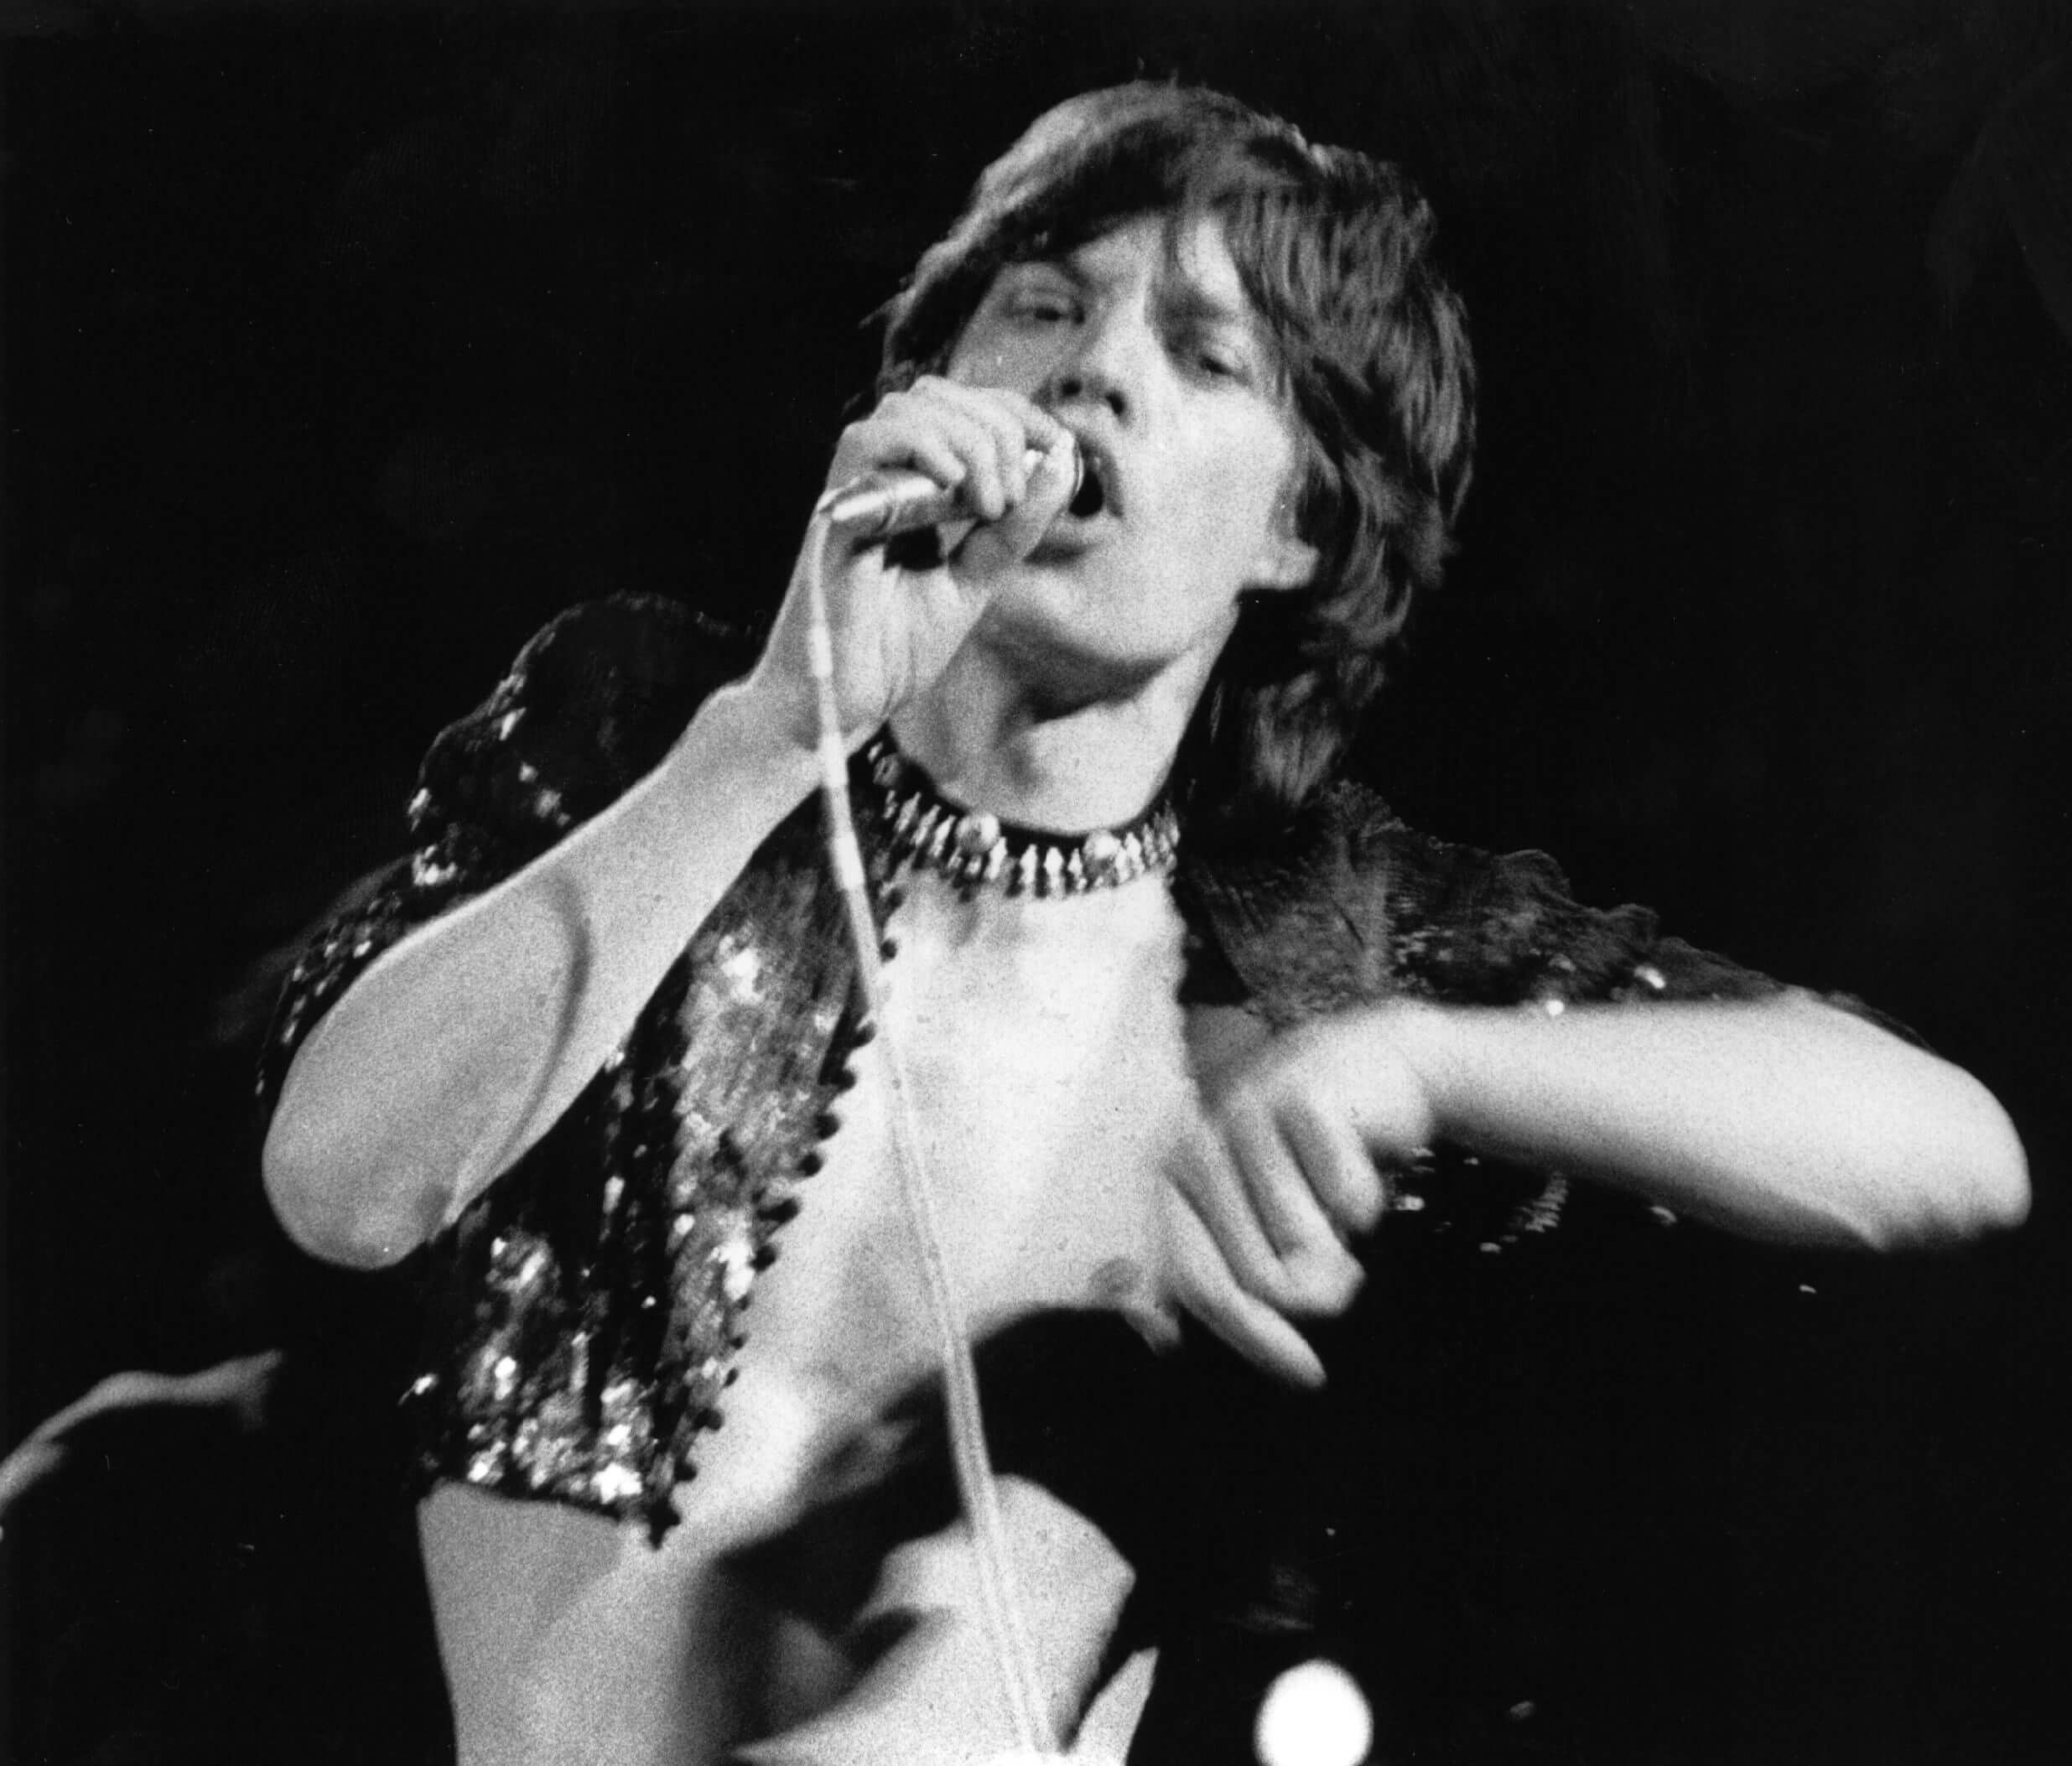 The Rolling Stones' Mick Jagger with a microphone